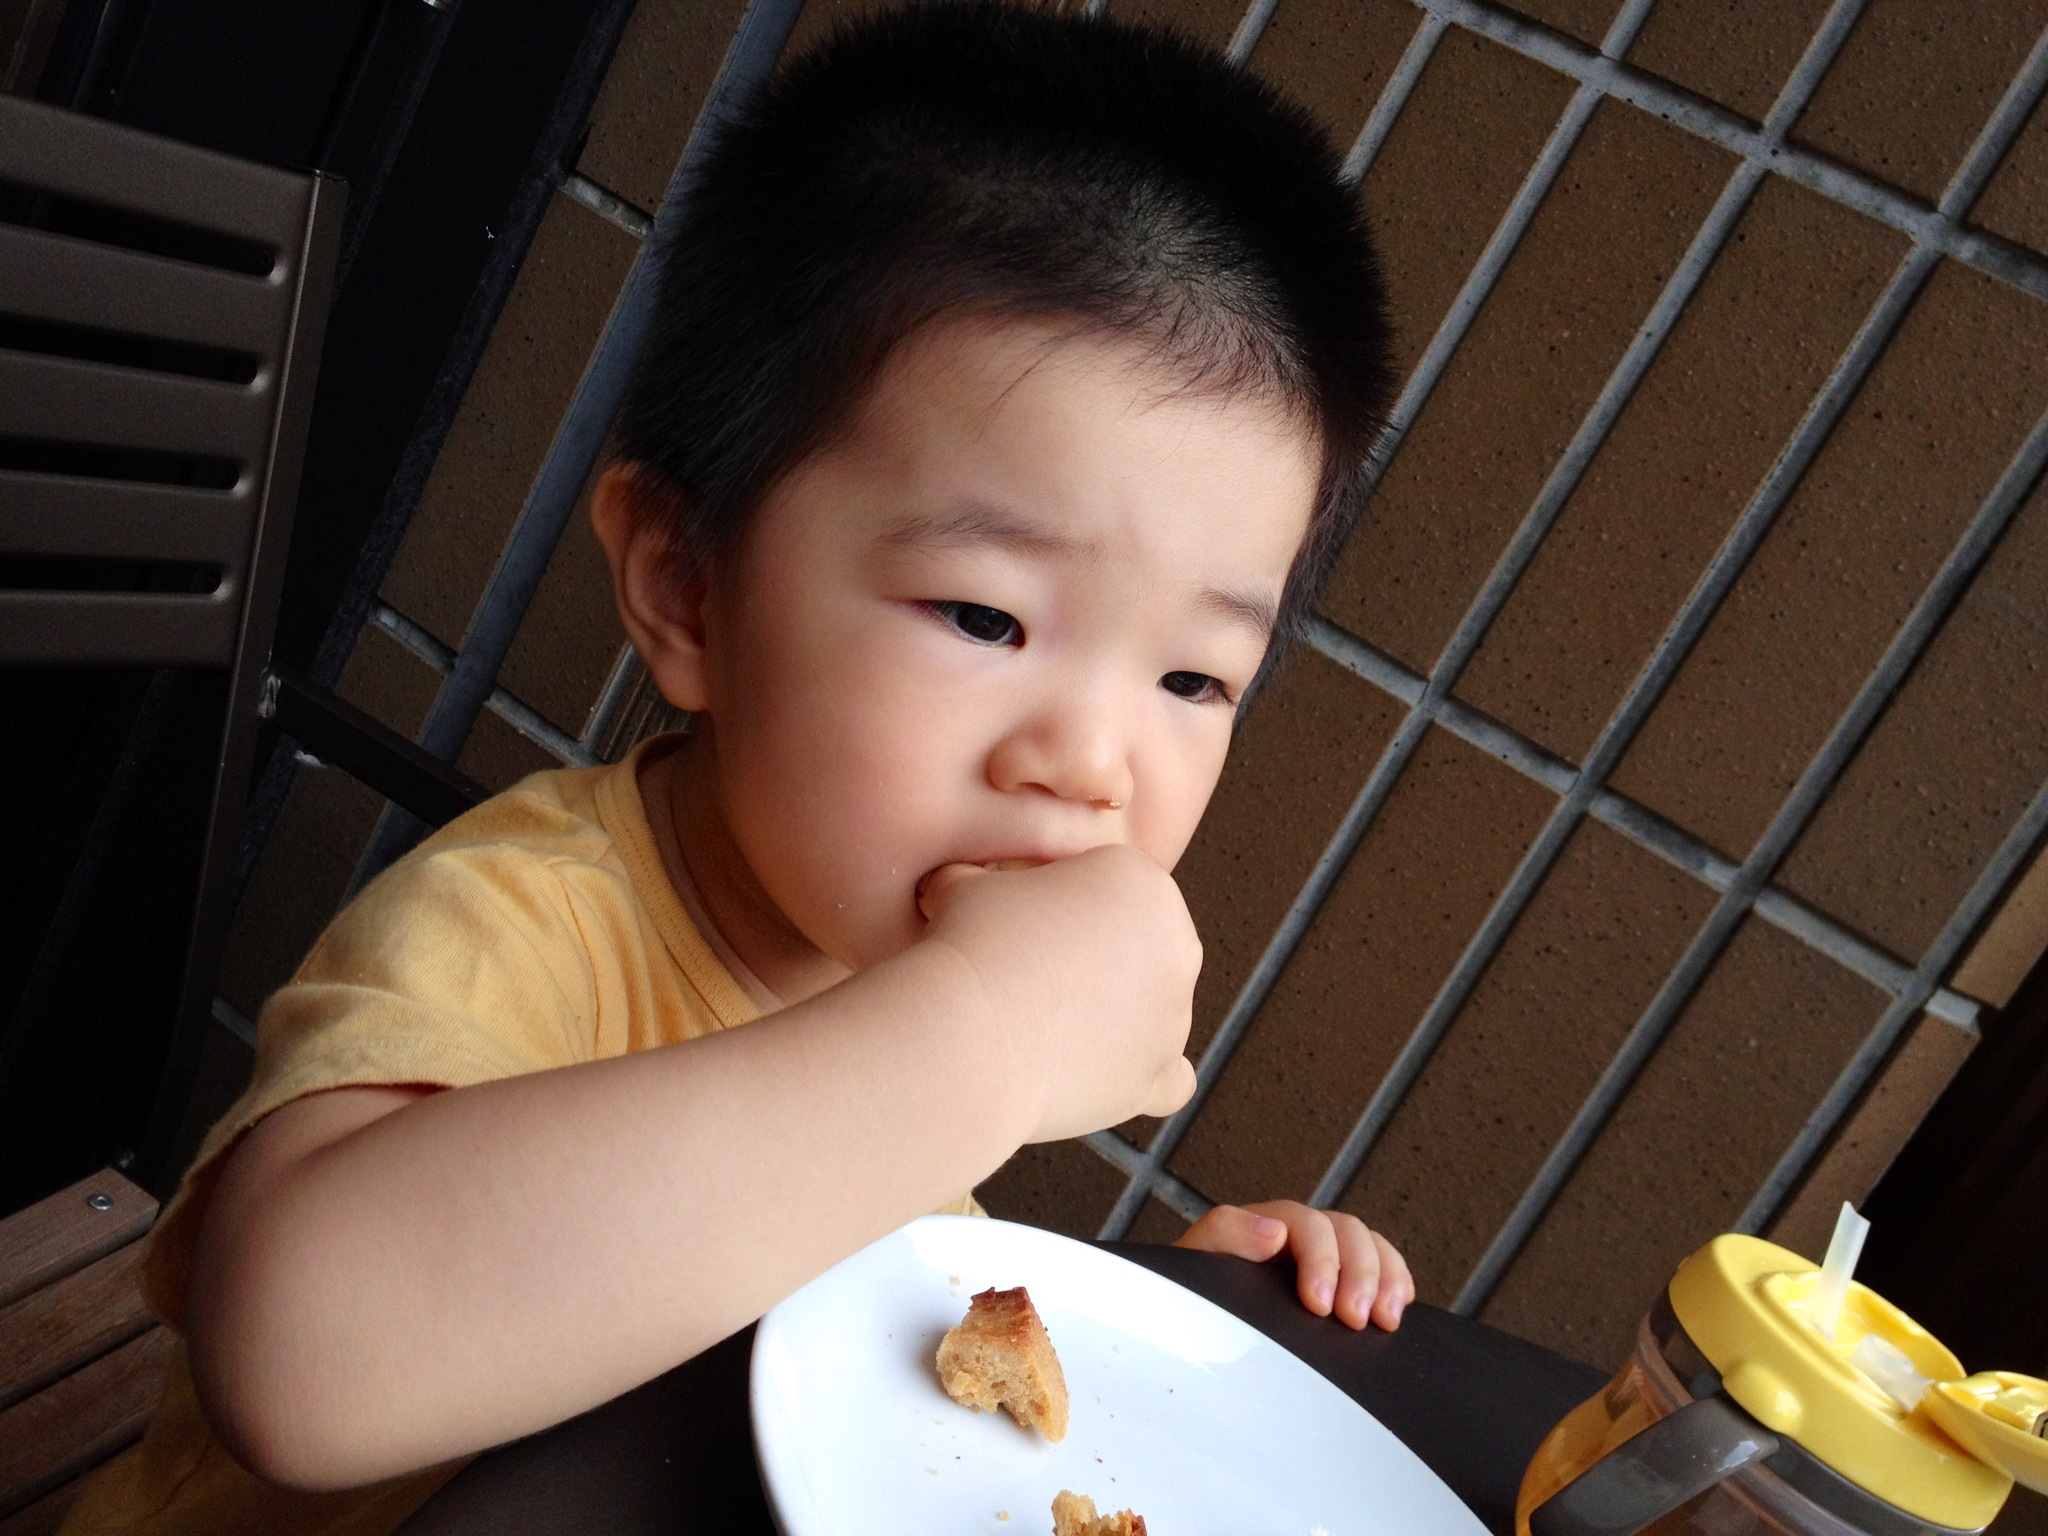 a little child sitting at a table with some food